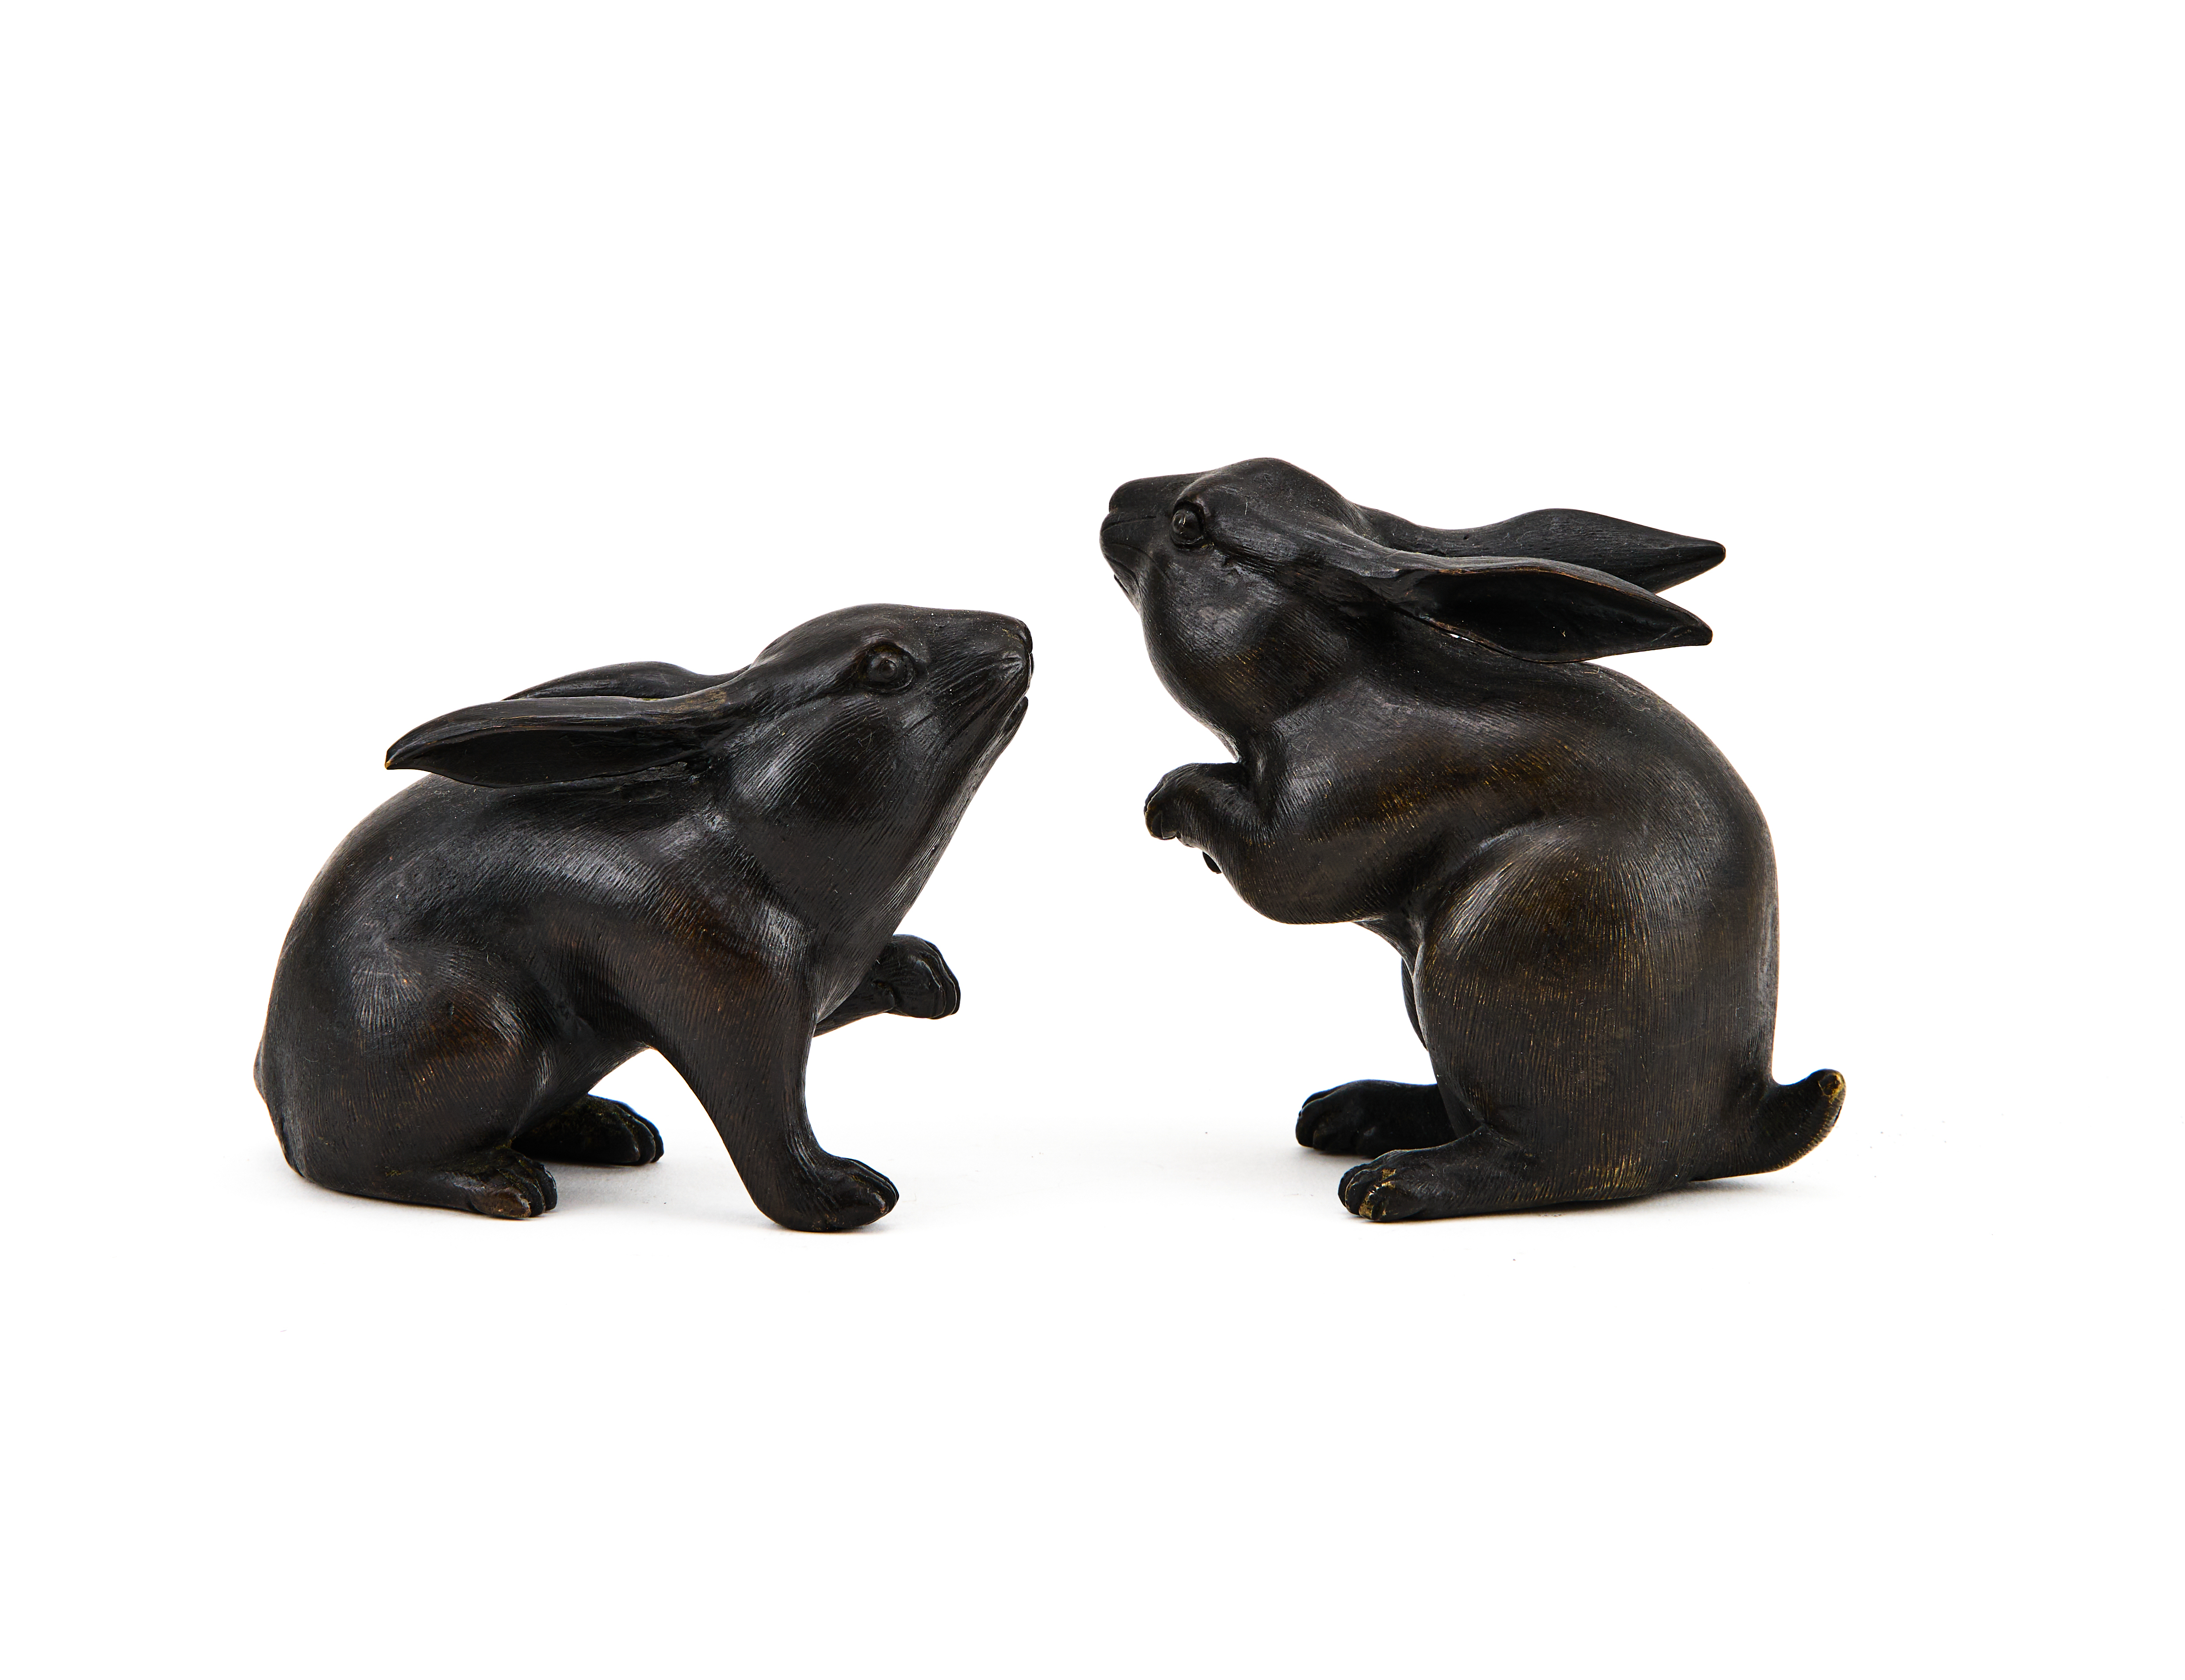 TWO JAPANESE BRONZE HARES, MEIJI PERIOD (1868-1912) - Image 2 of 5